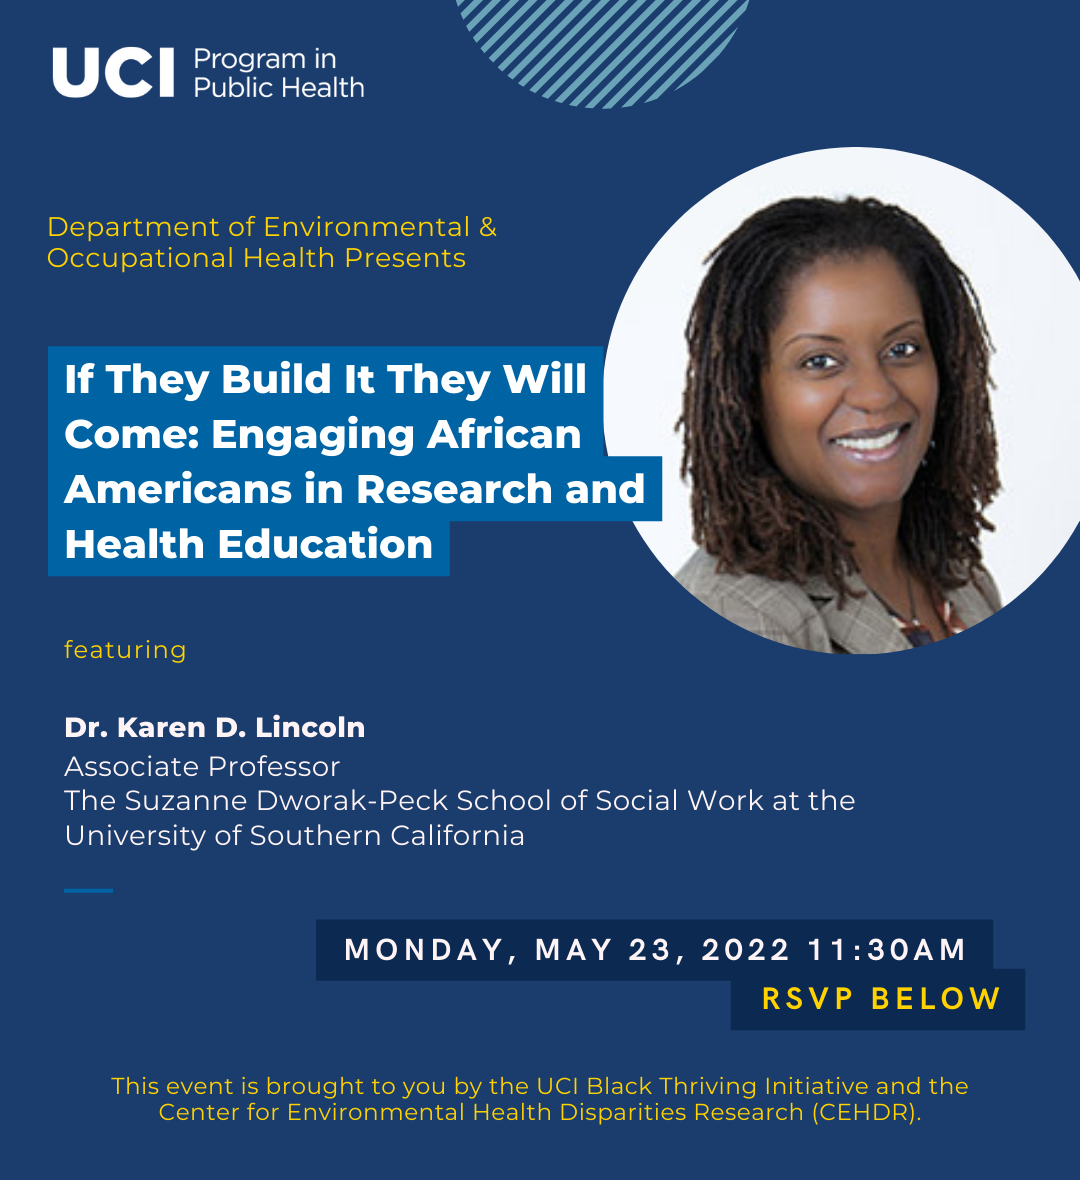 If they Build It They Will Come - Engaging African Americans in Research and Health Education with Dr. Lincoln on May 23, 2022 at 11:30Pm on Zoom